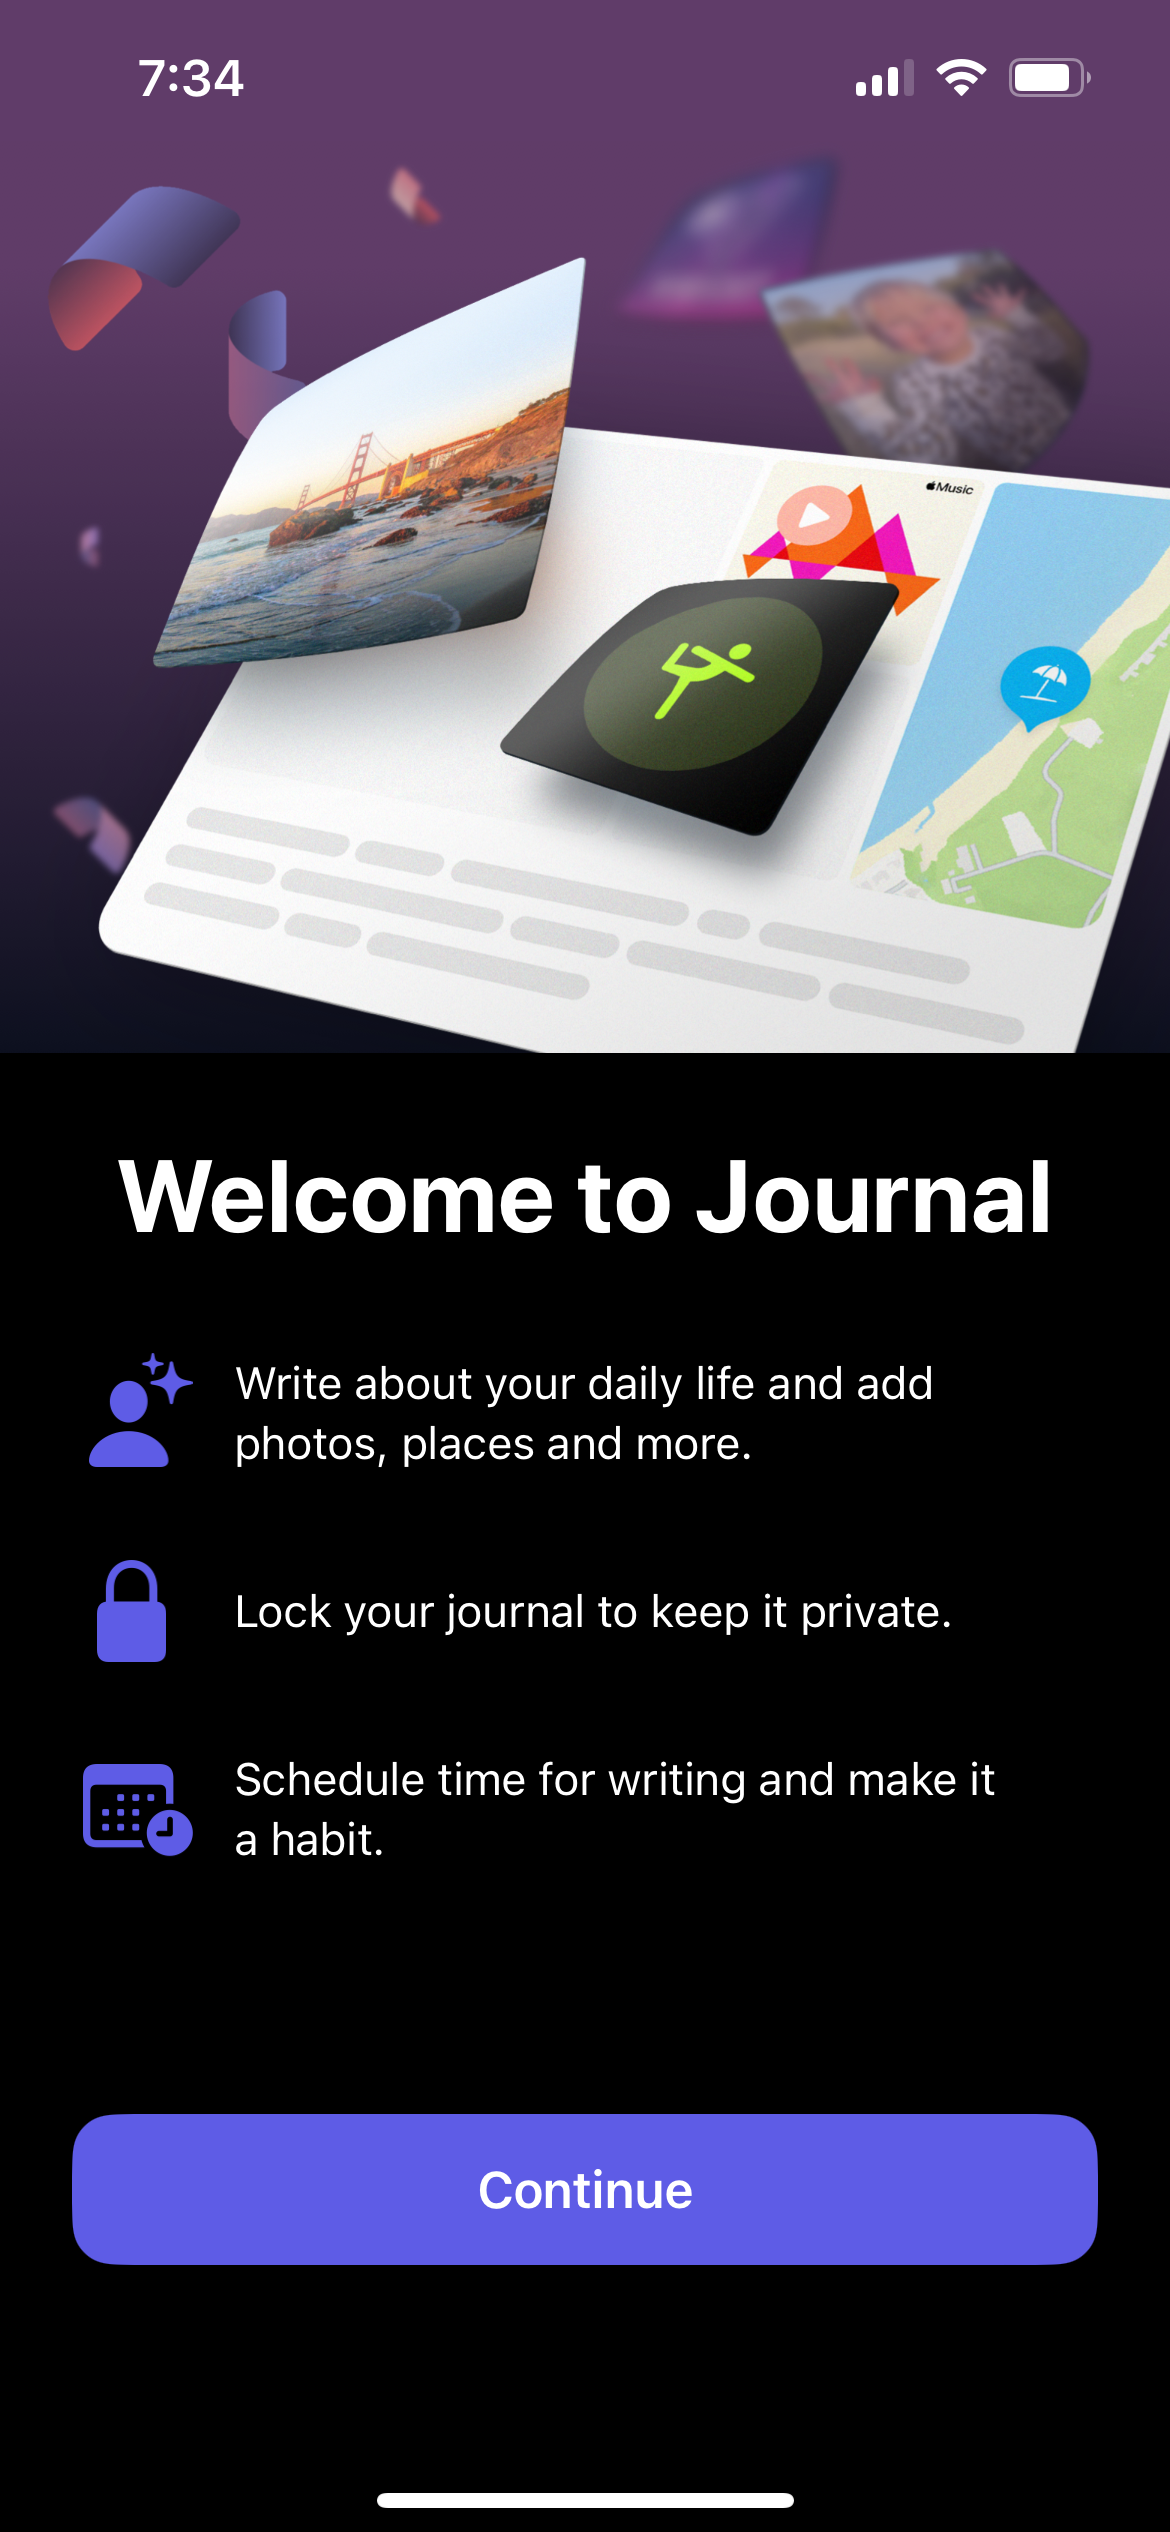 Apple launches Journal app, a new app for reflecting on everyday